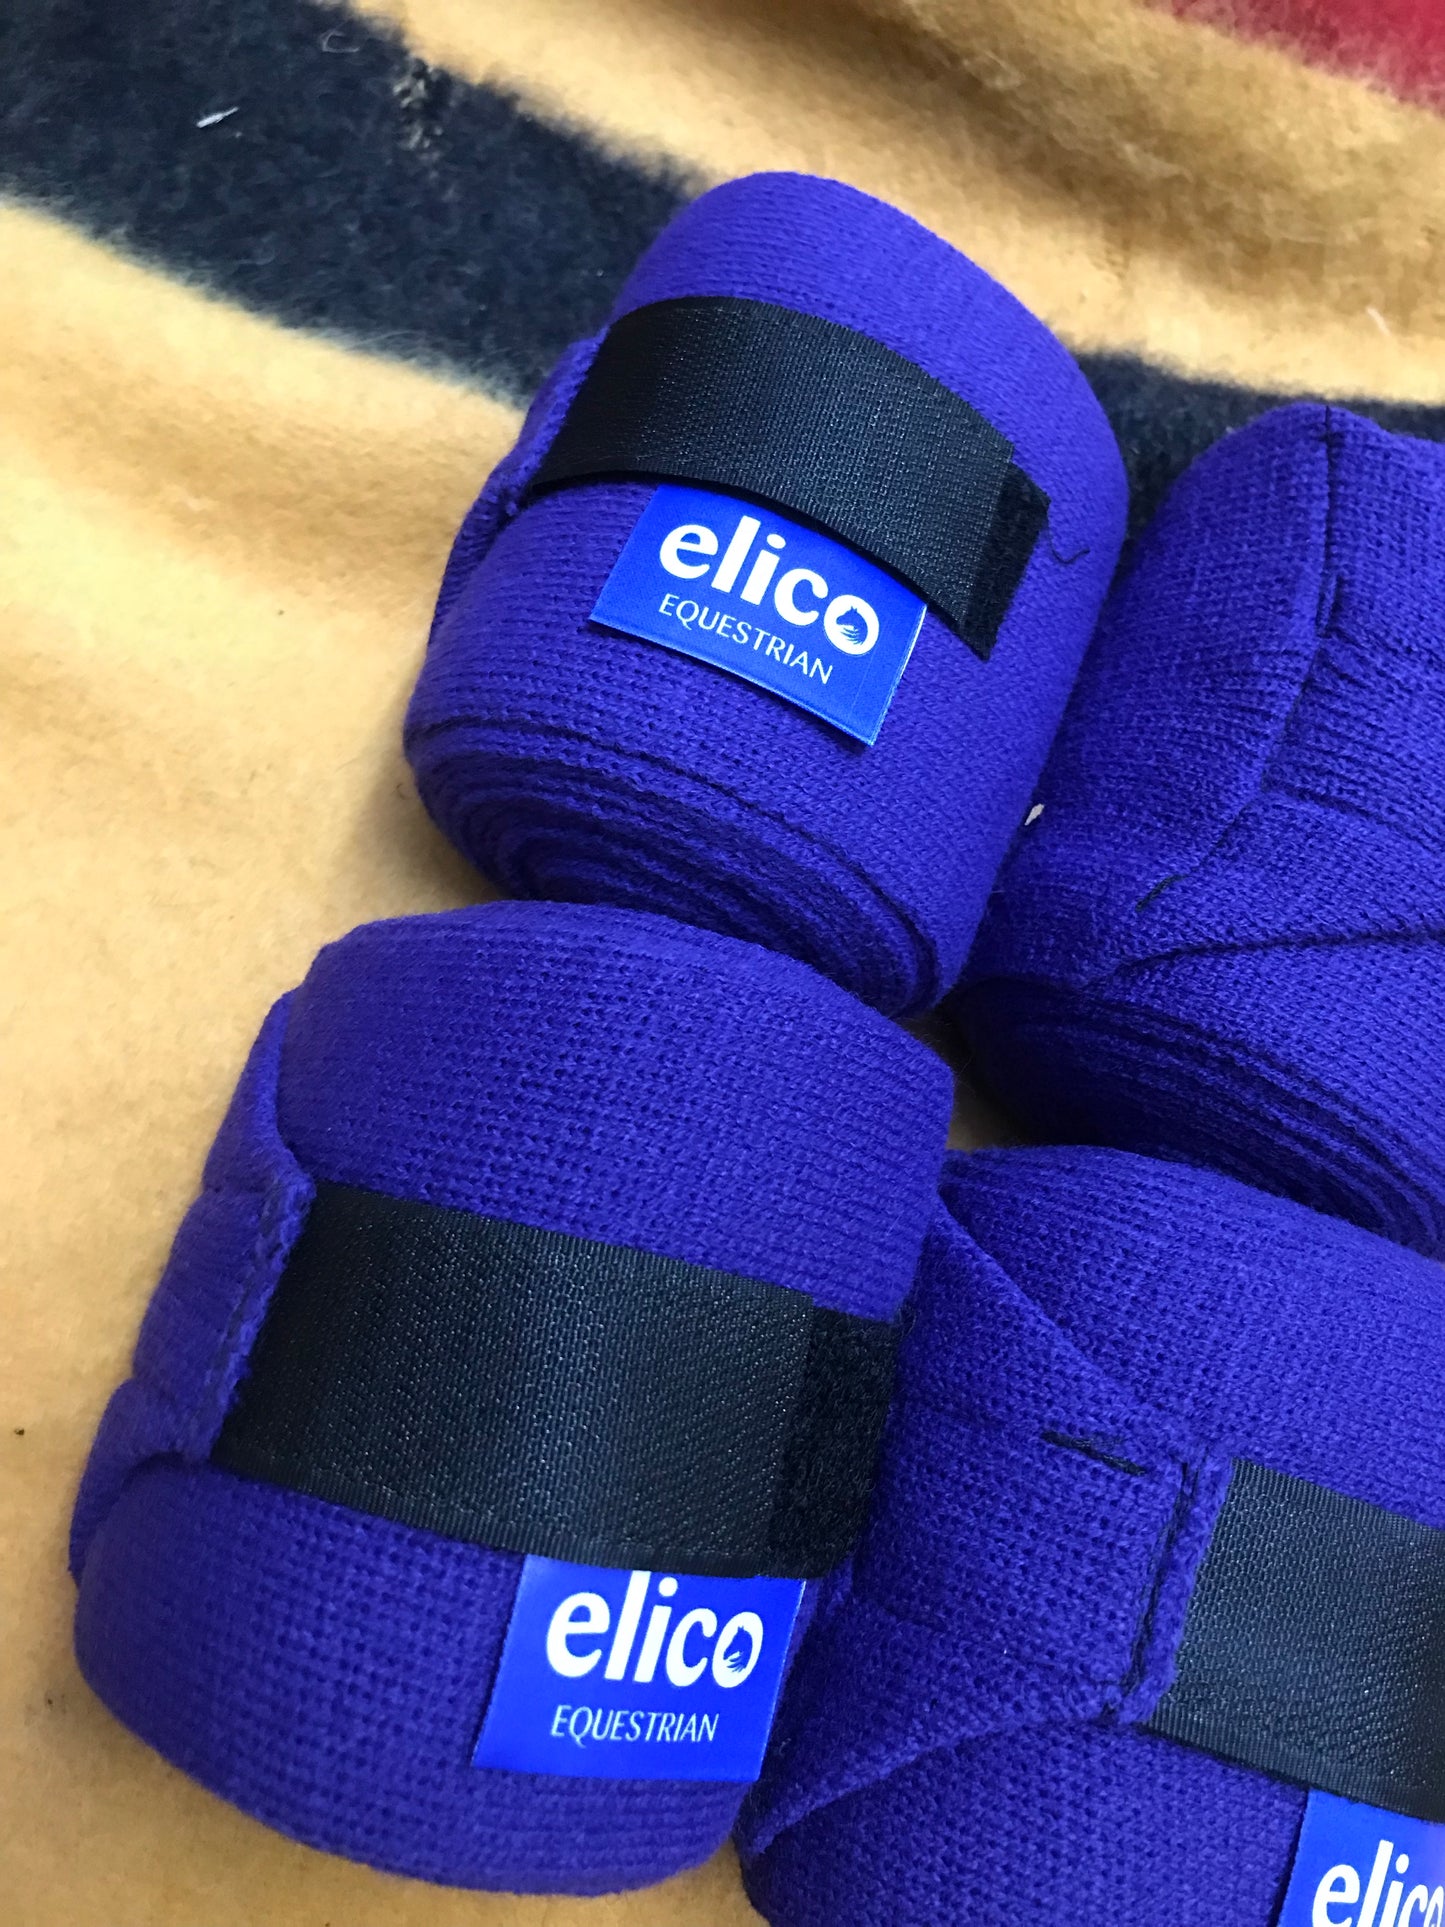 New elico purple cotton stretch bandages FREE POSTAGE🟢